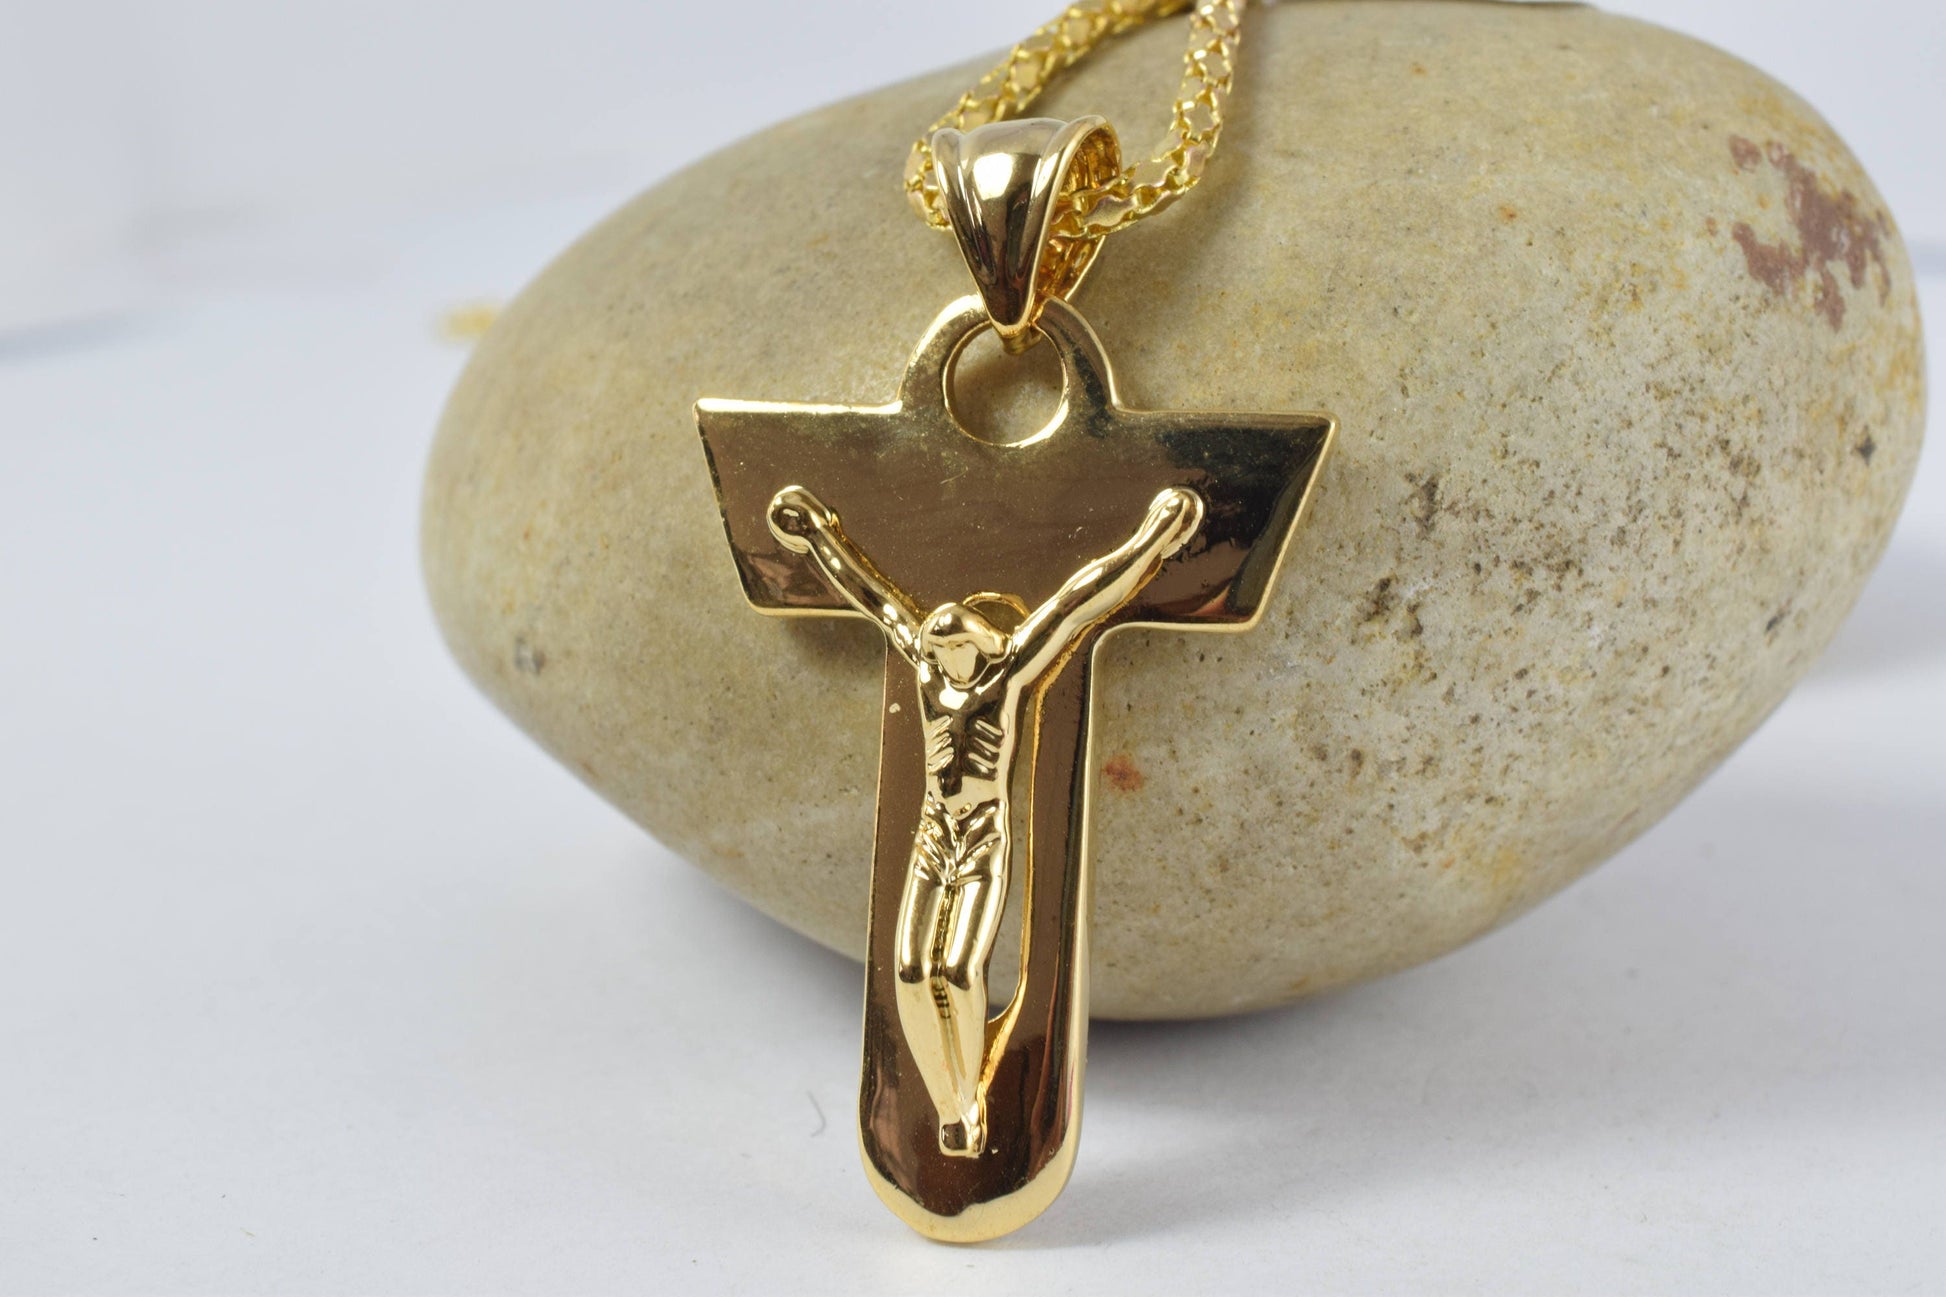 Gold Filled EP Decorative 18KT Crosses, Cross Pendant, Orthodox African Finding, Jewelry Christian Traditional, Wholesale Gold-fill